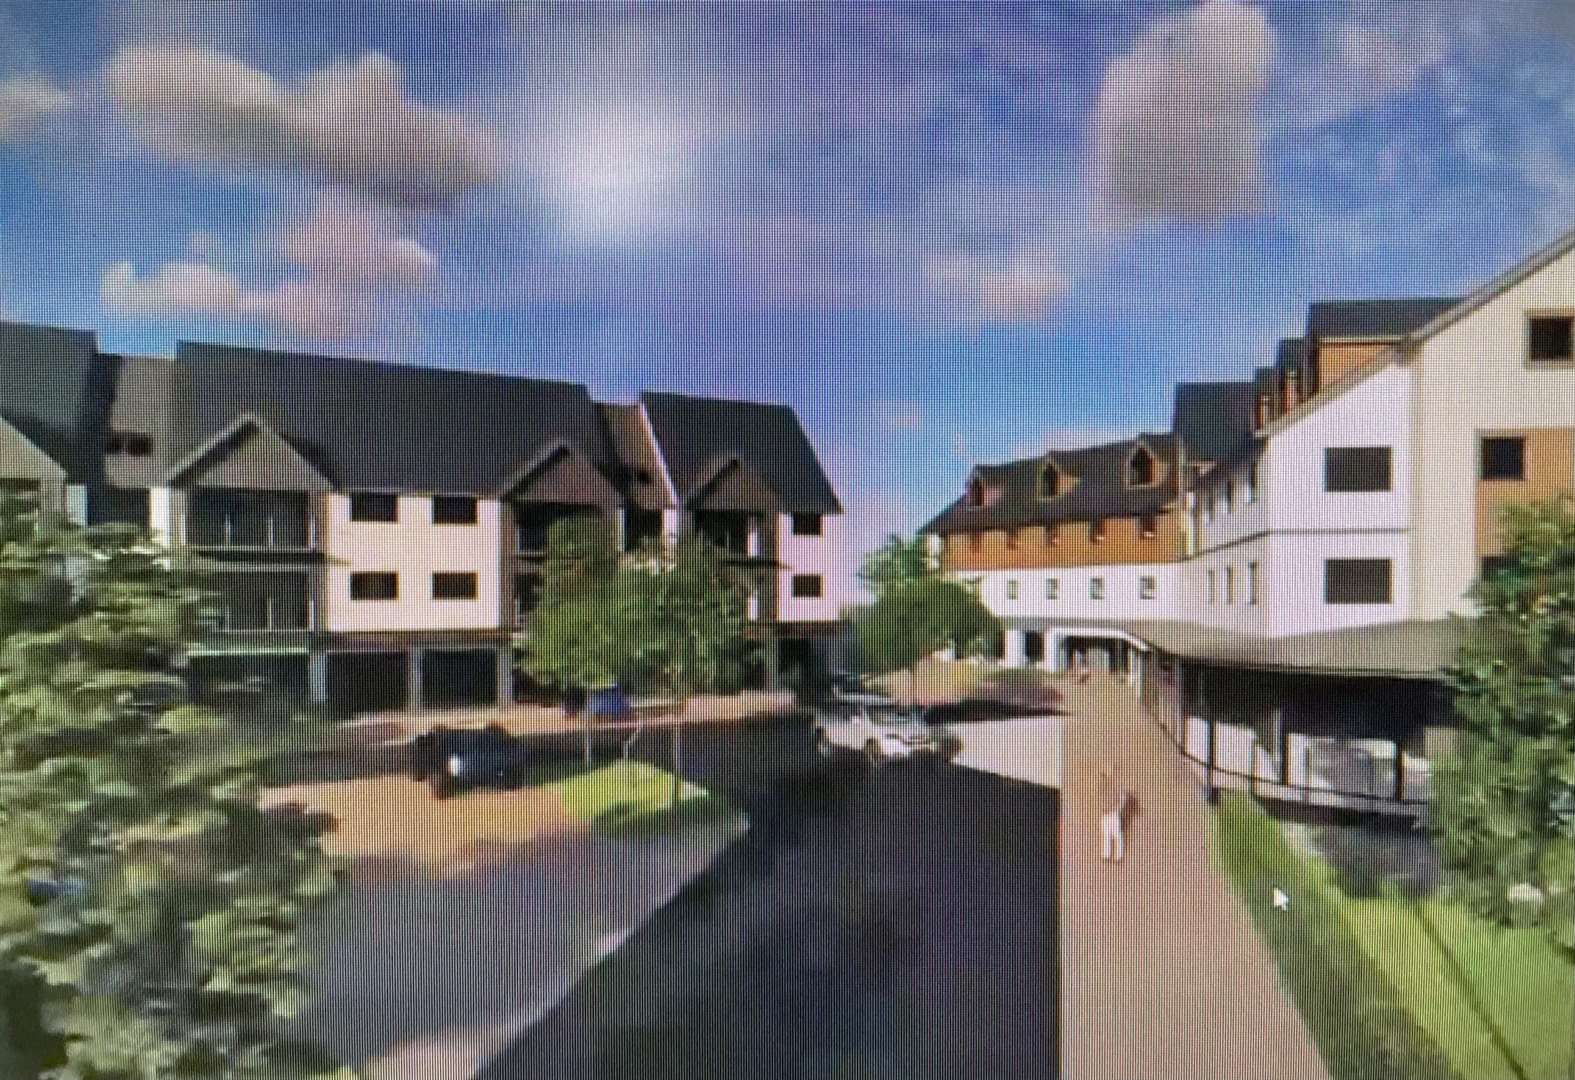 The proposed hotel (right) and shops with holiday accommodation (left).